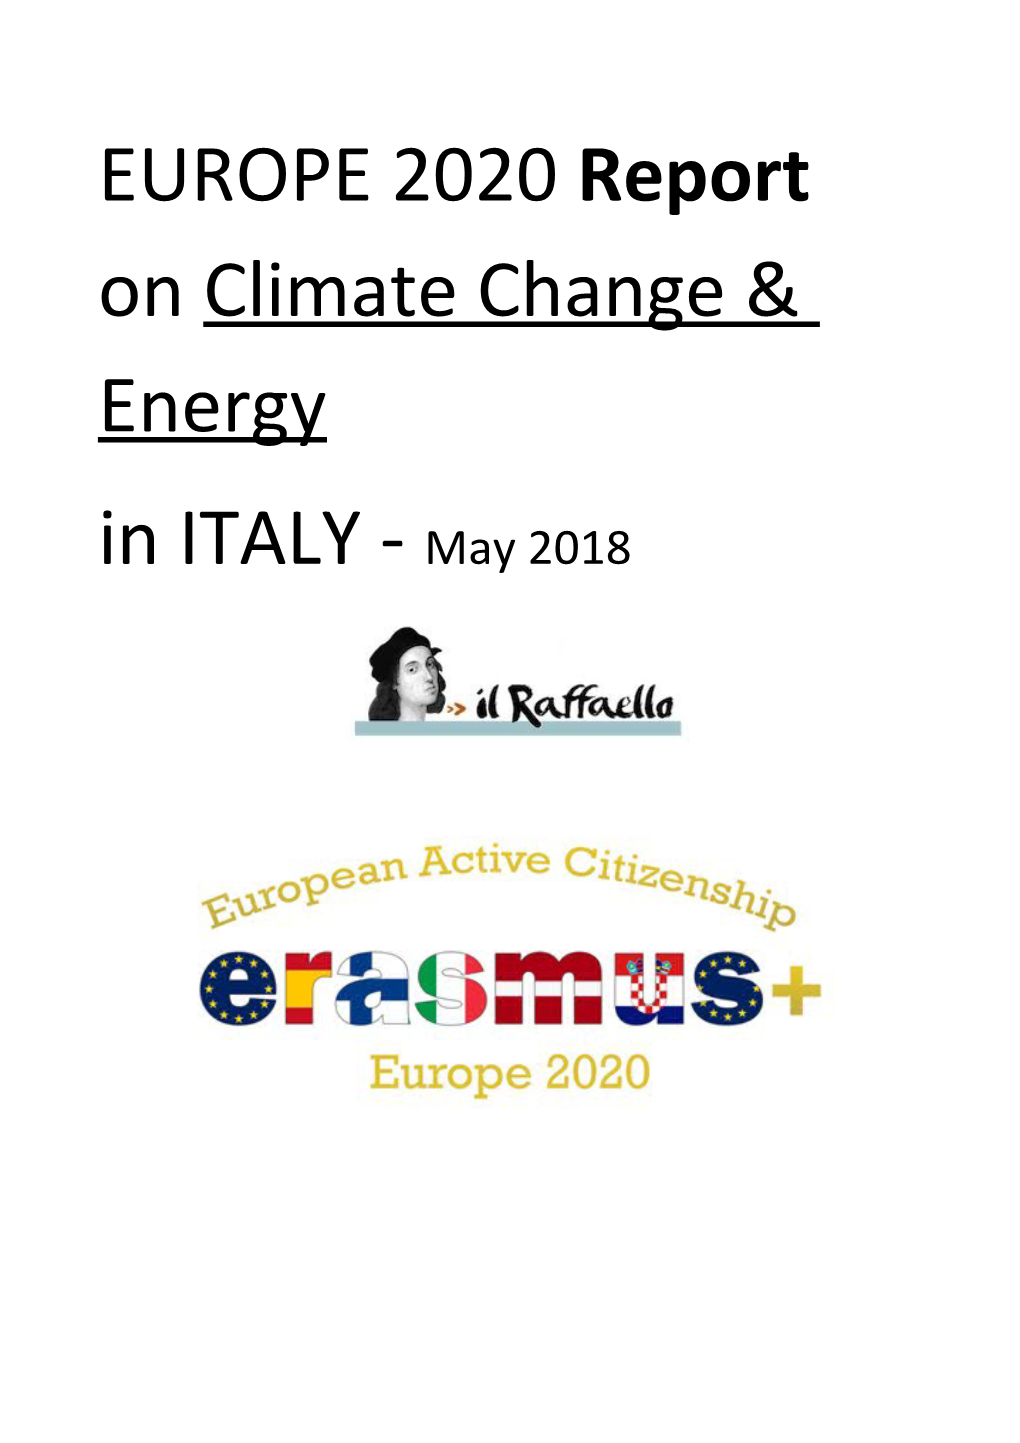 EUROPE 2020 Report on Climate Change & Energy